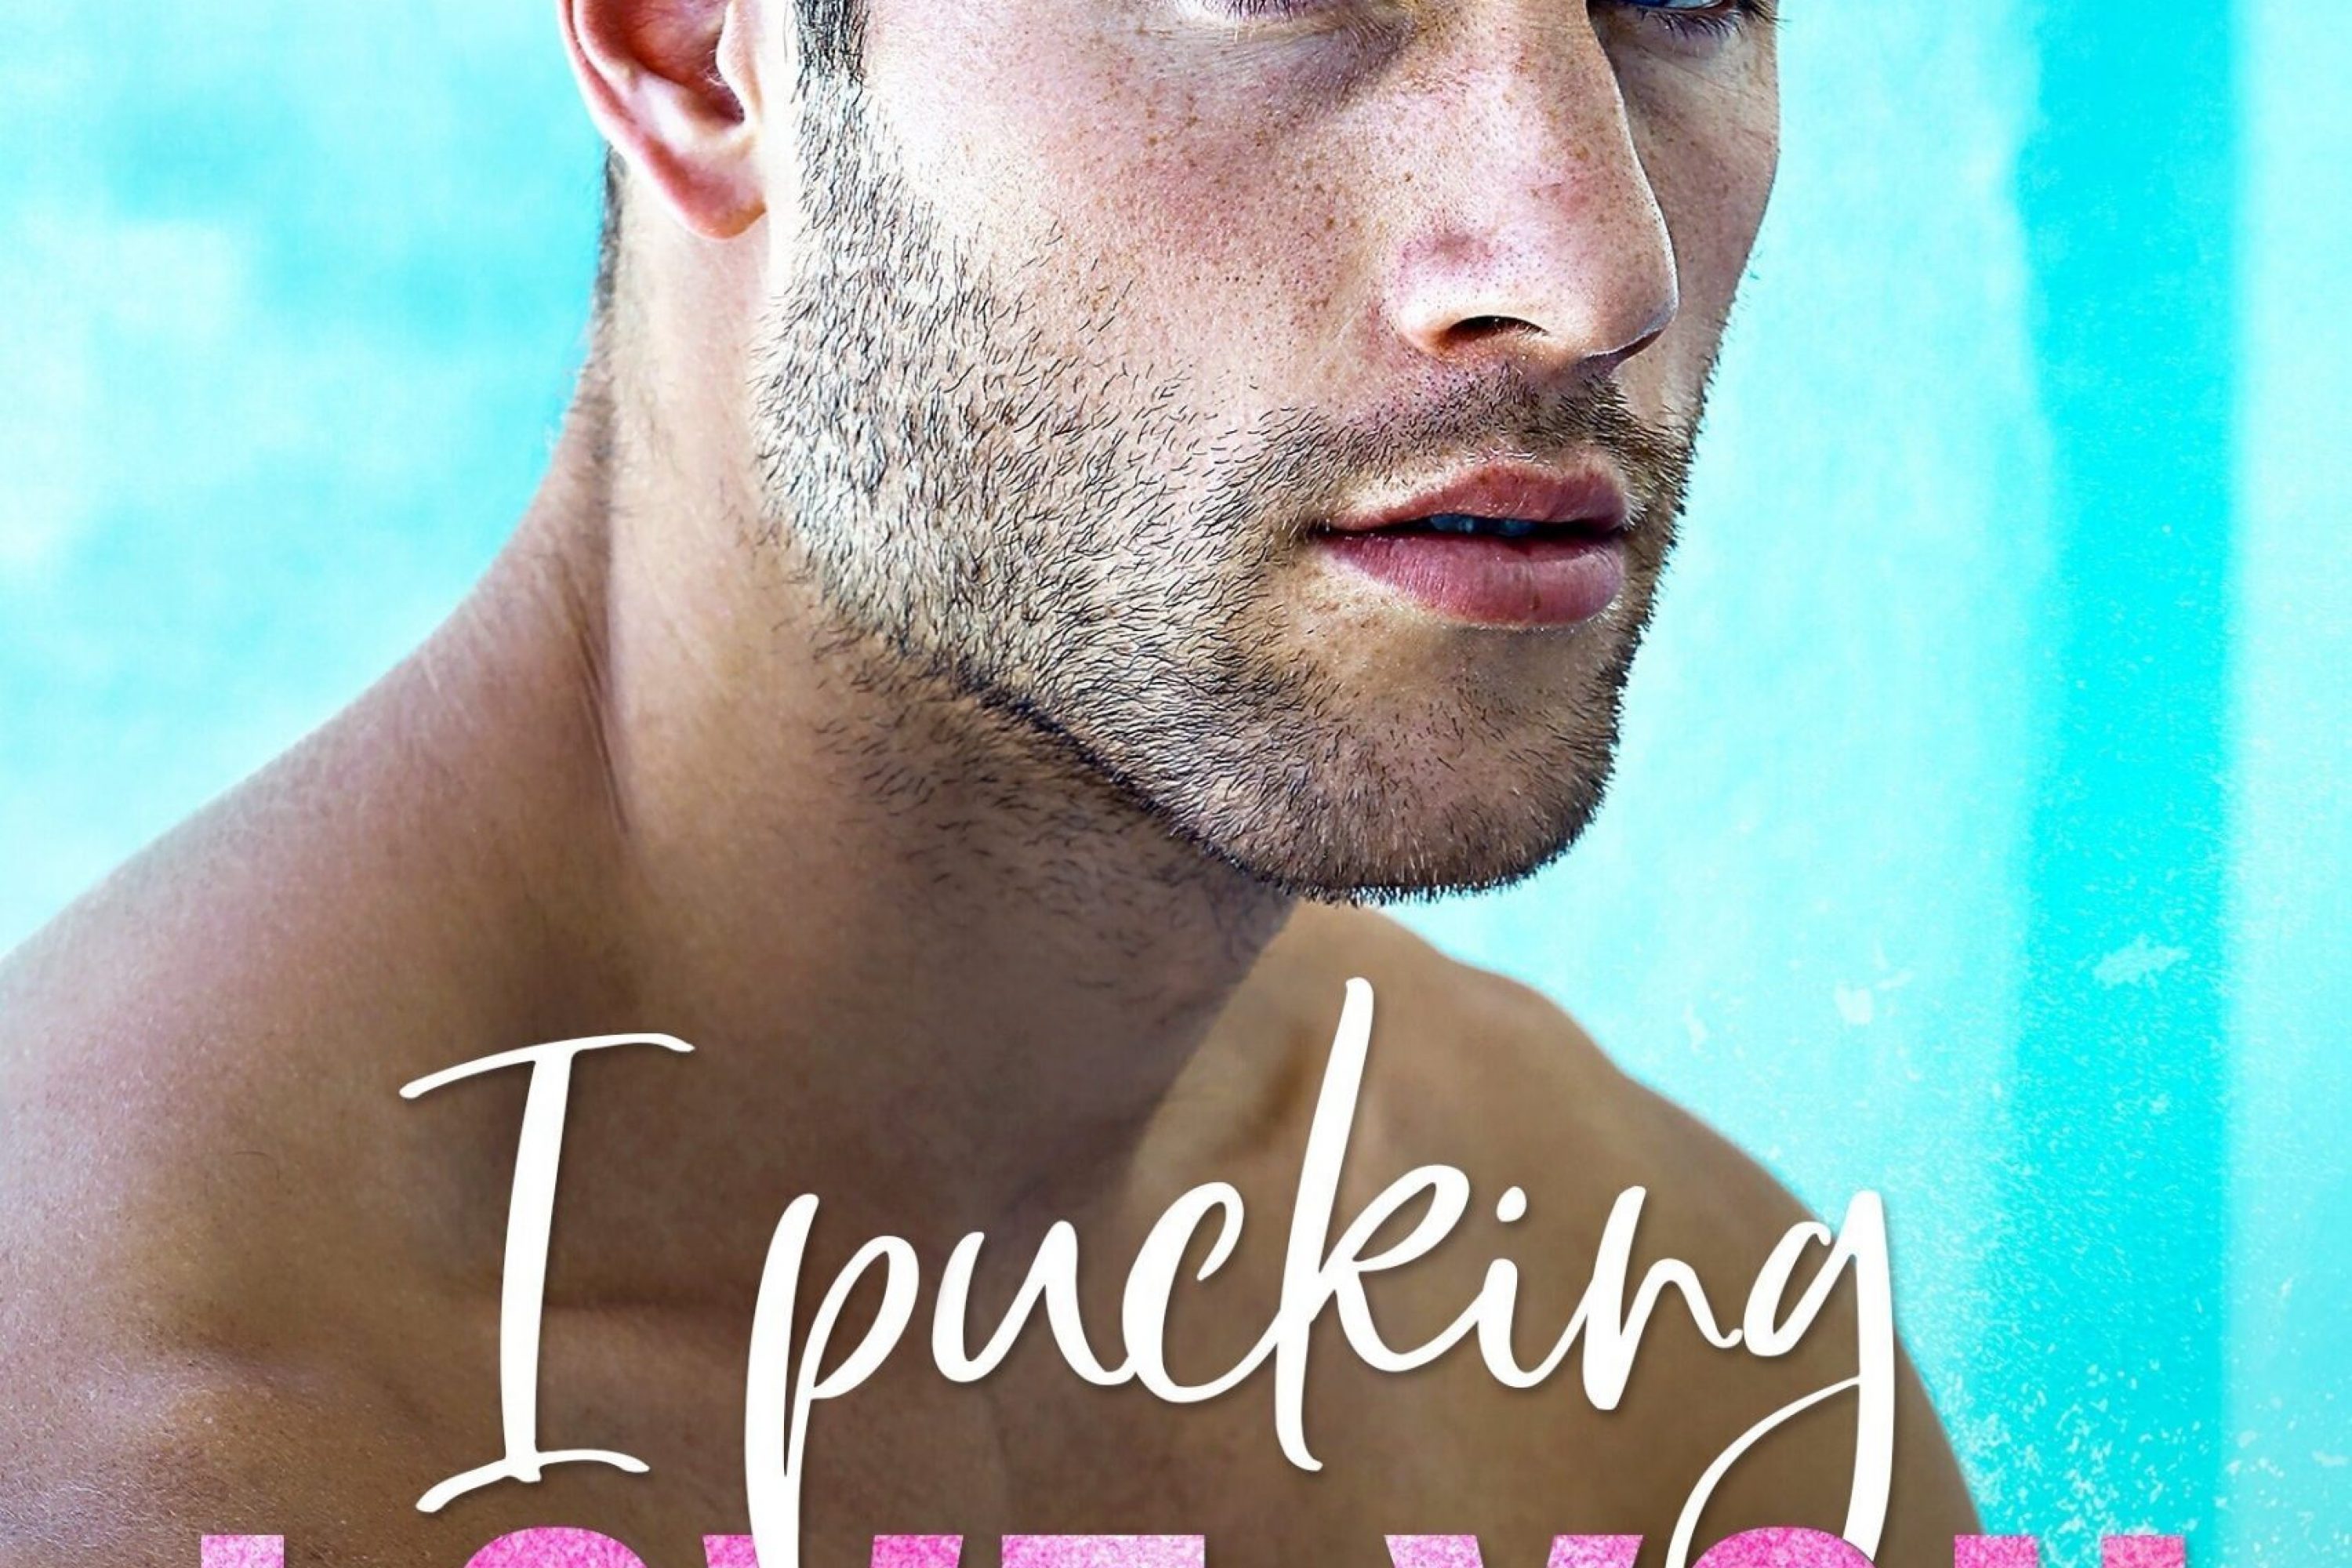 Review: I Pucking Love You by Pippa Grant